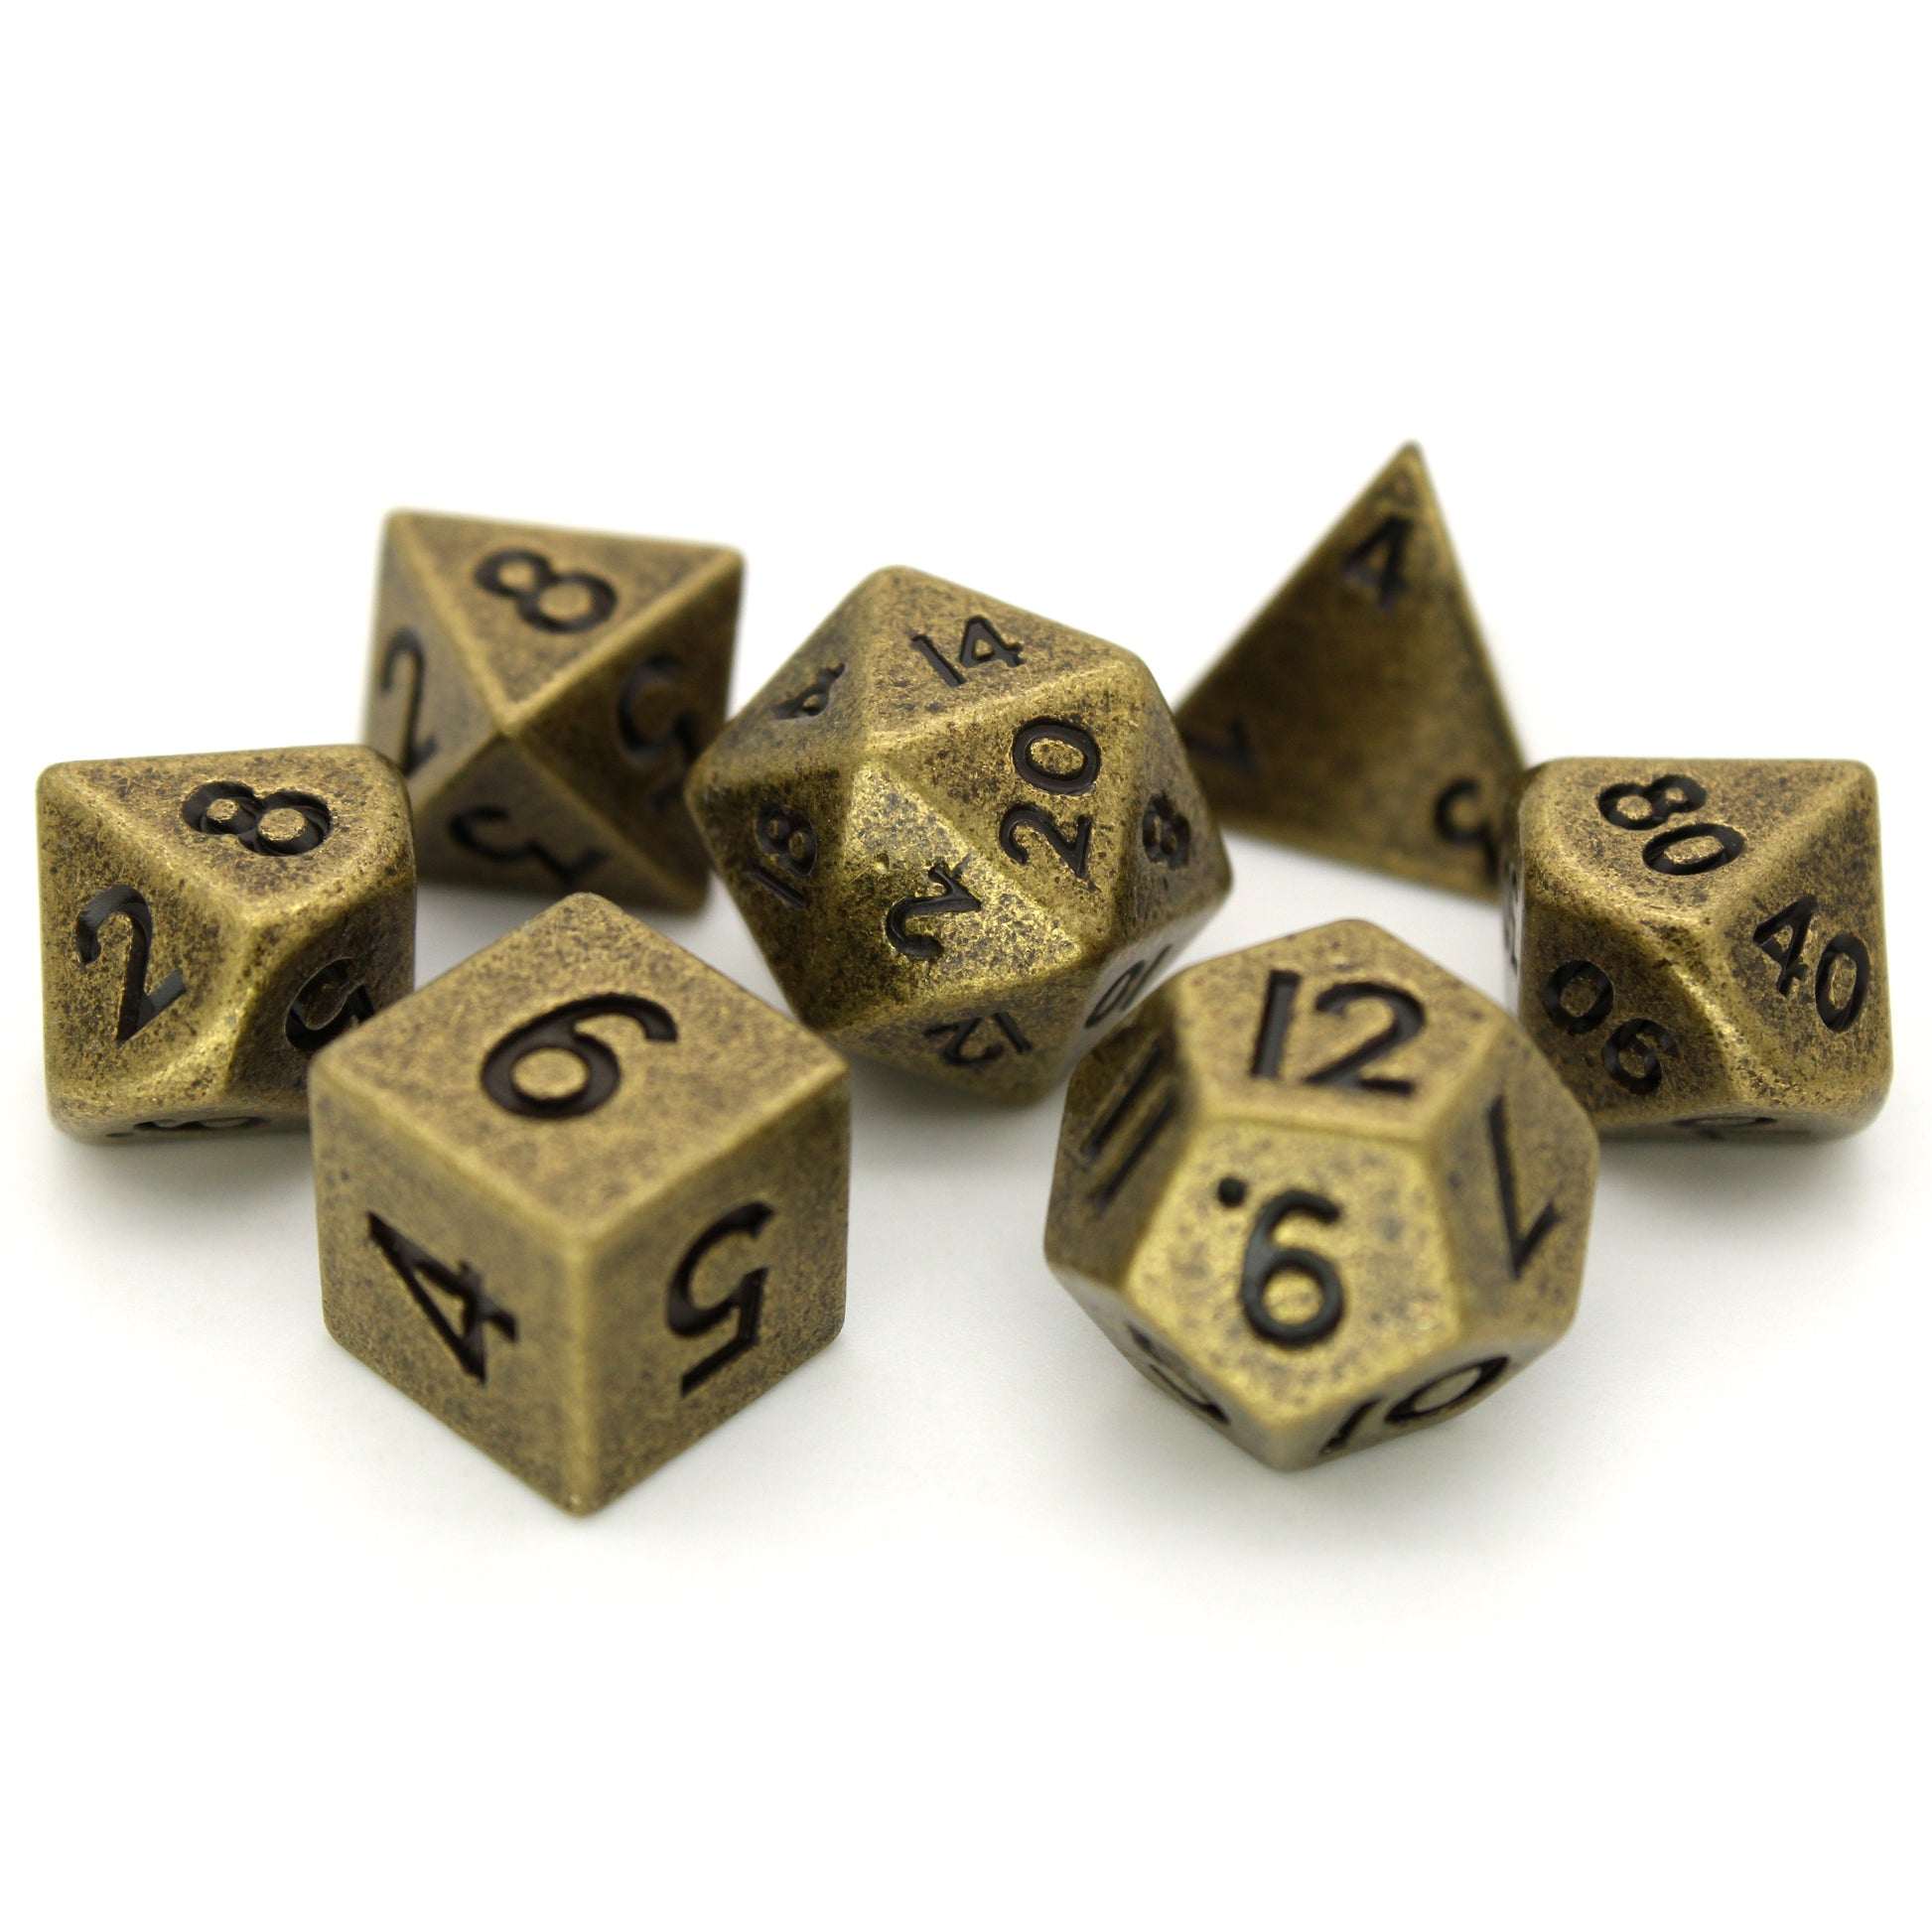 Peanuts is a 7-piece set of ancient gold colored 10mm metal dice.